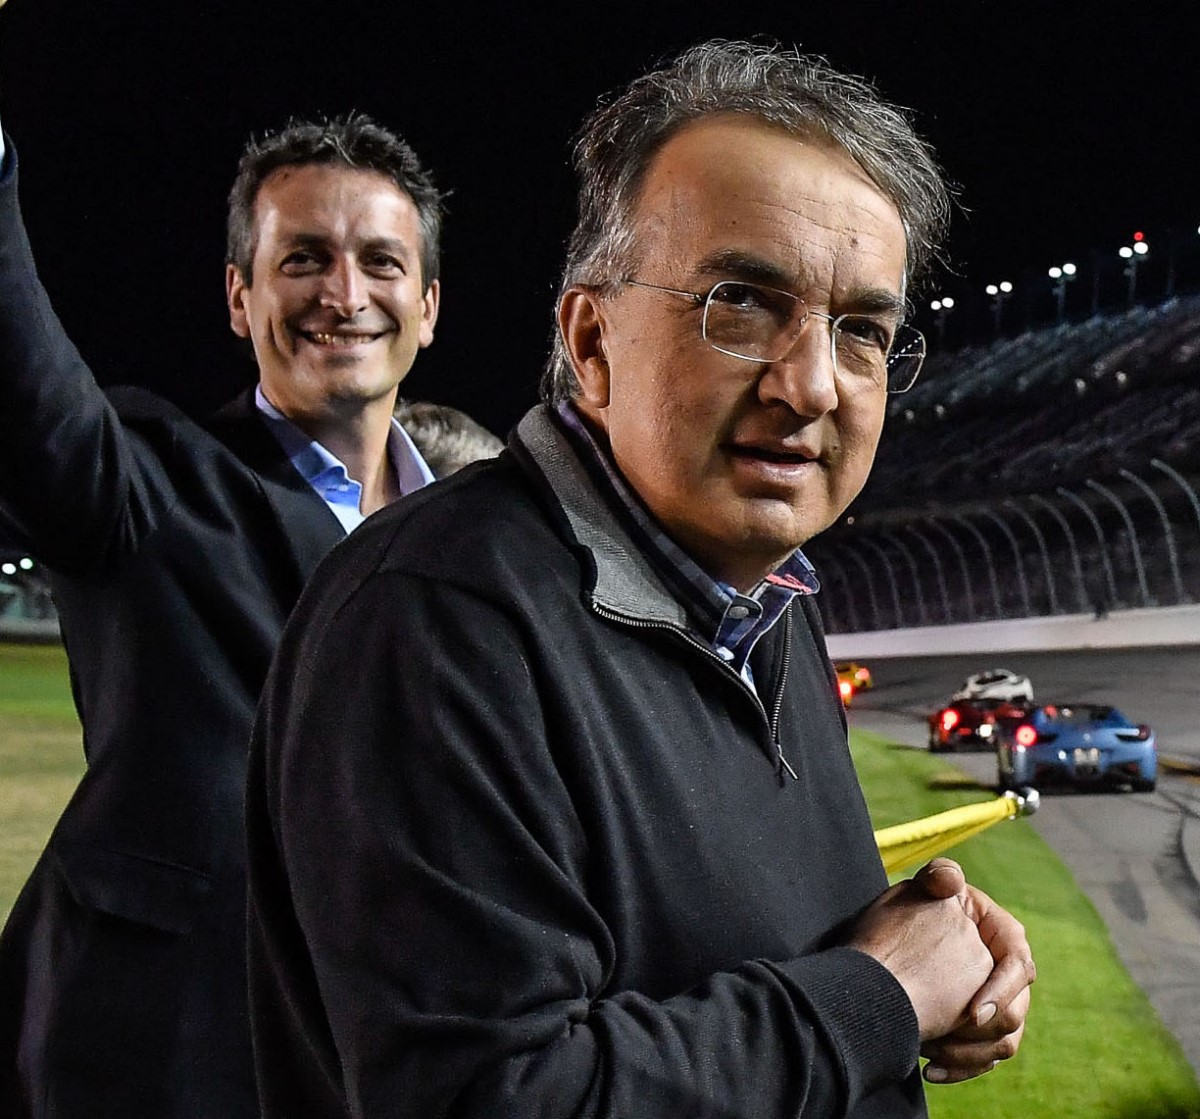 Sergio Marchionne put an engine designer in charge of the whole car. Imagine that!